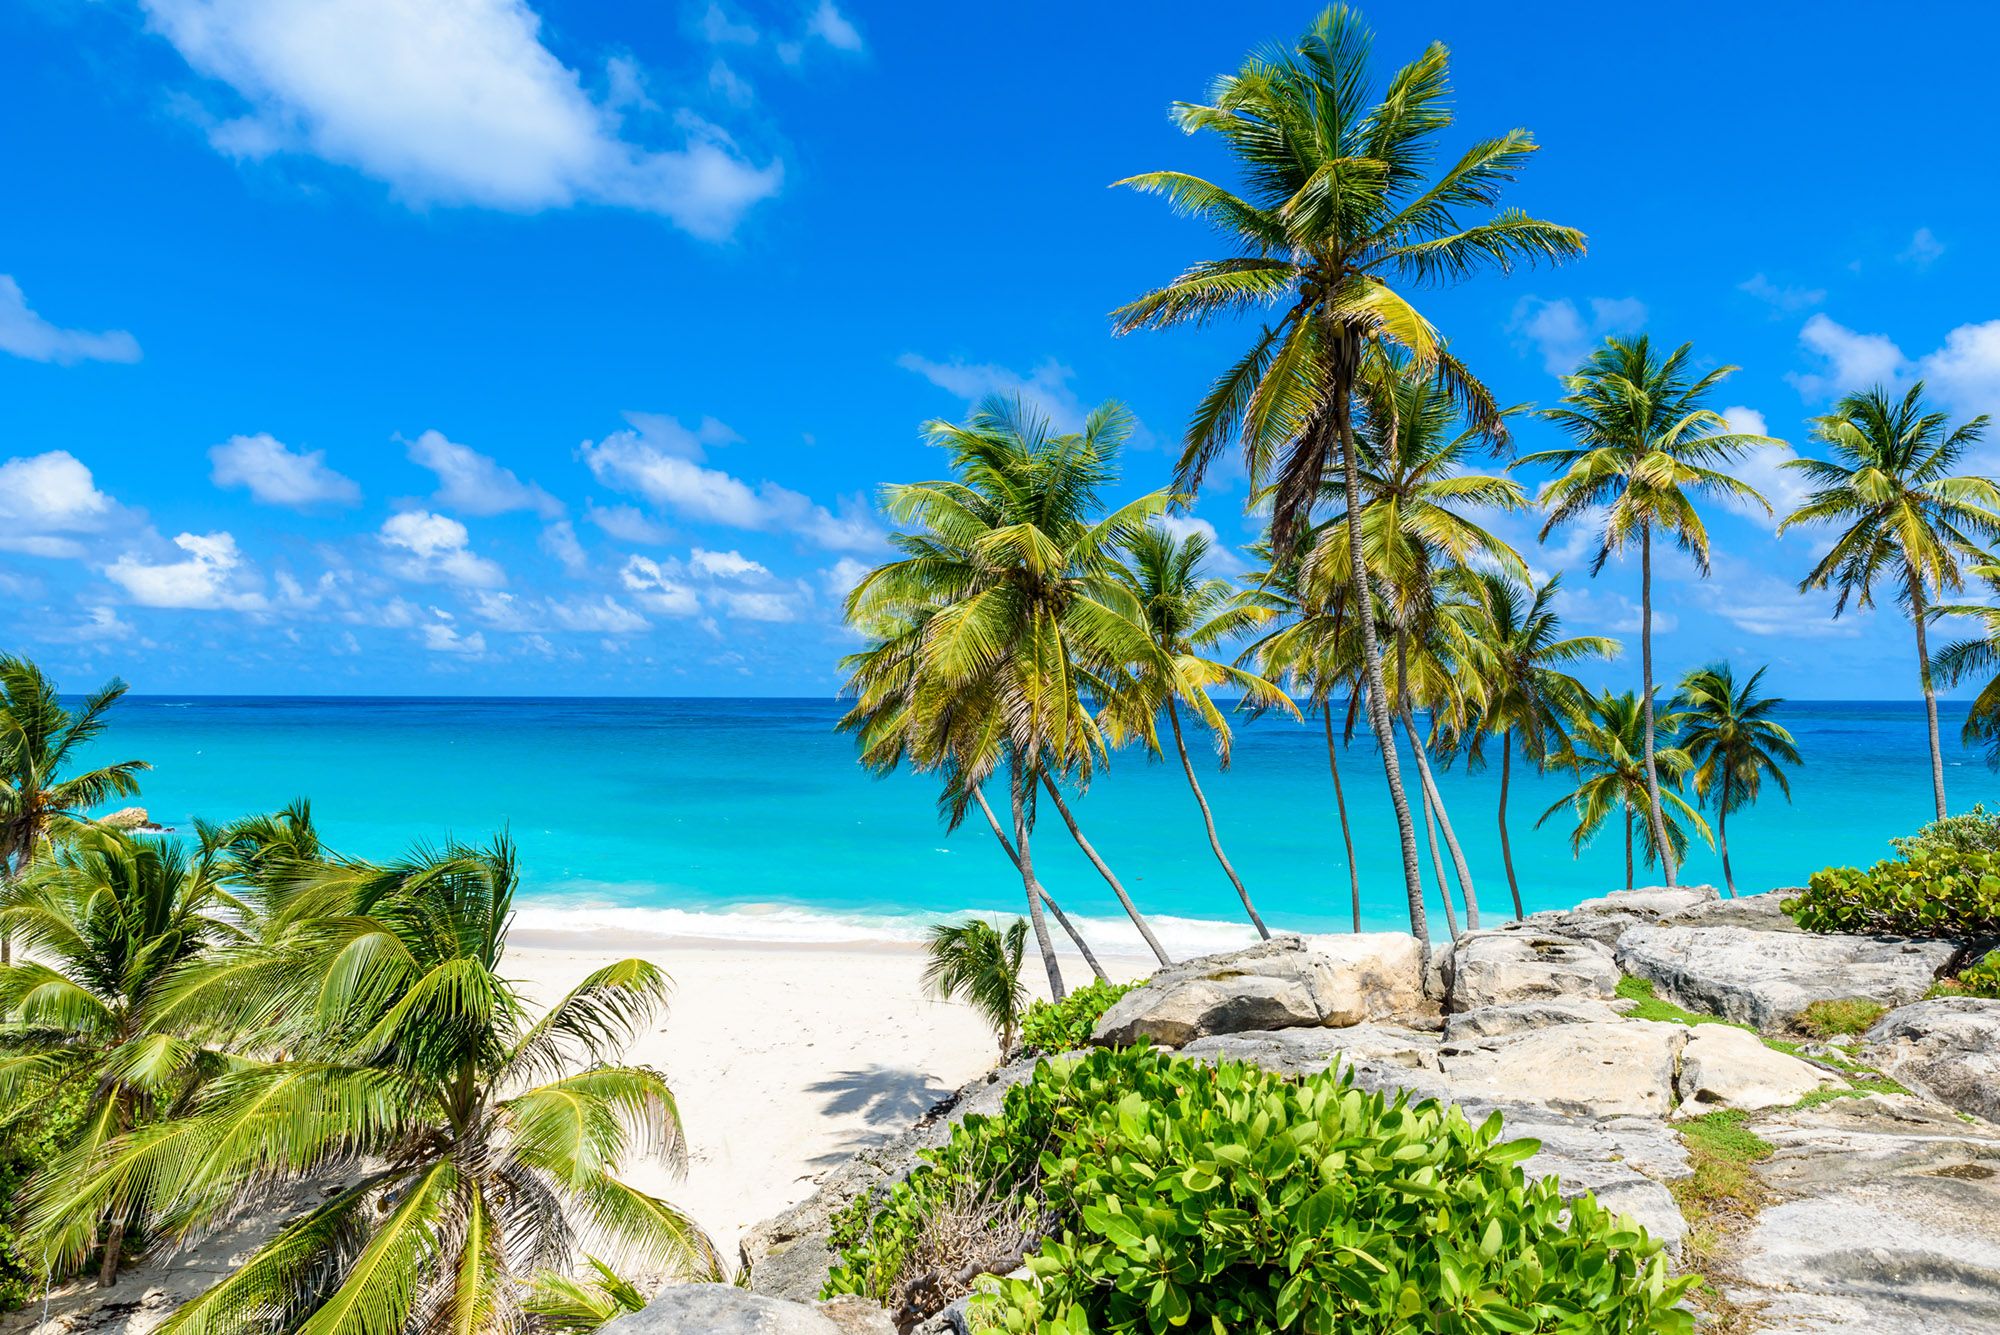 The Barbados party edit – the best bars, clubs and festivals on the island